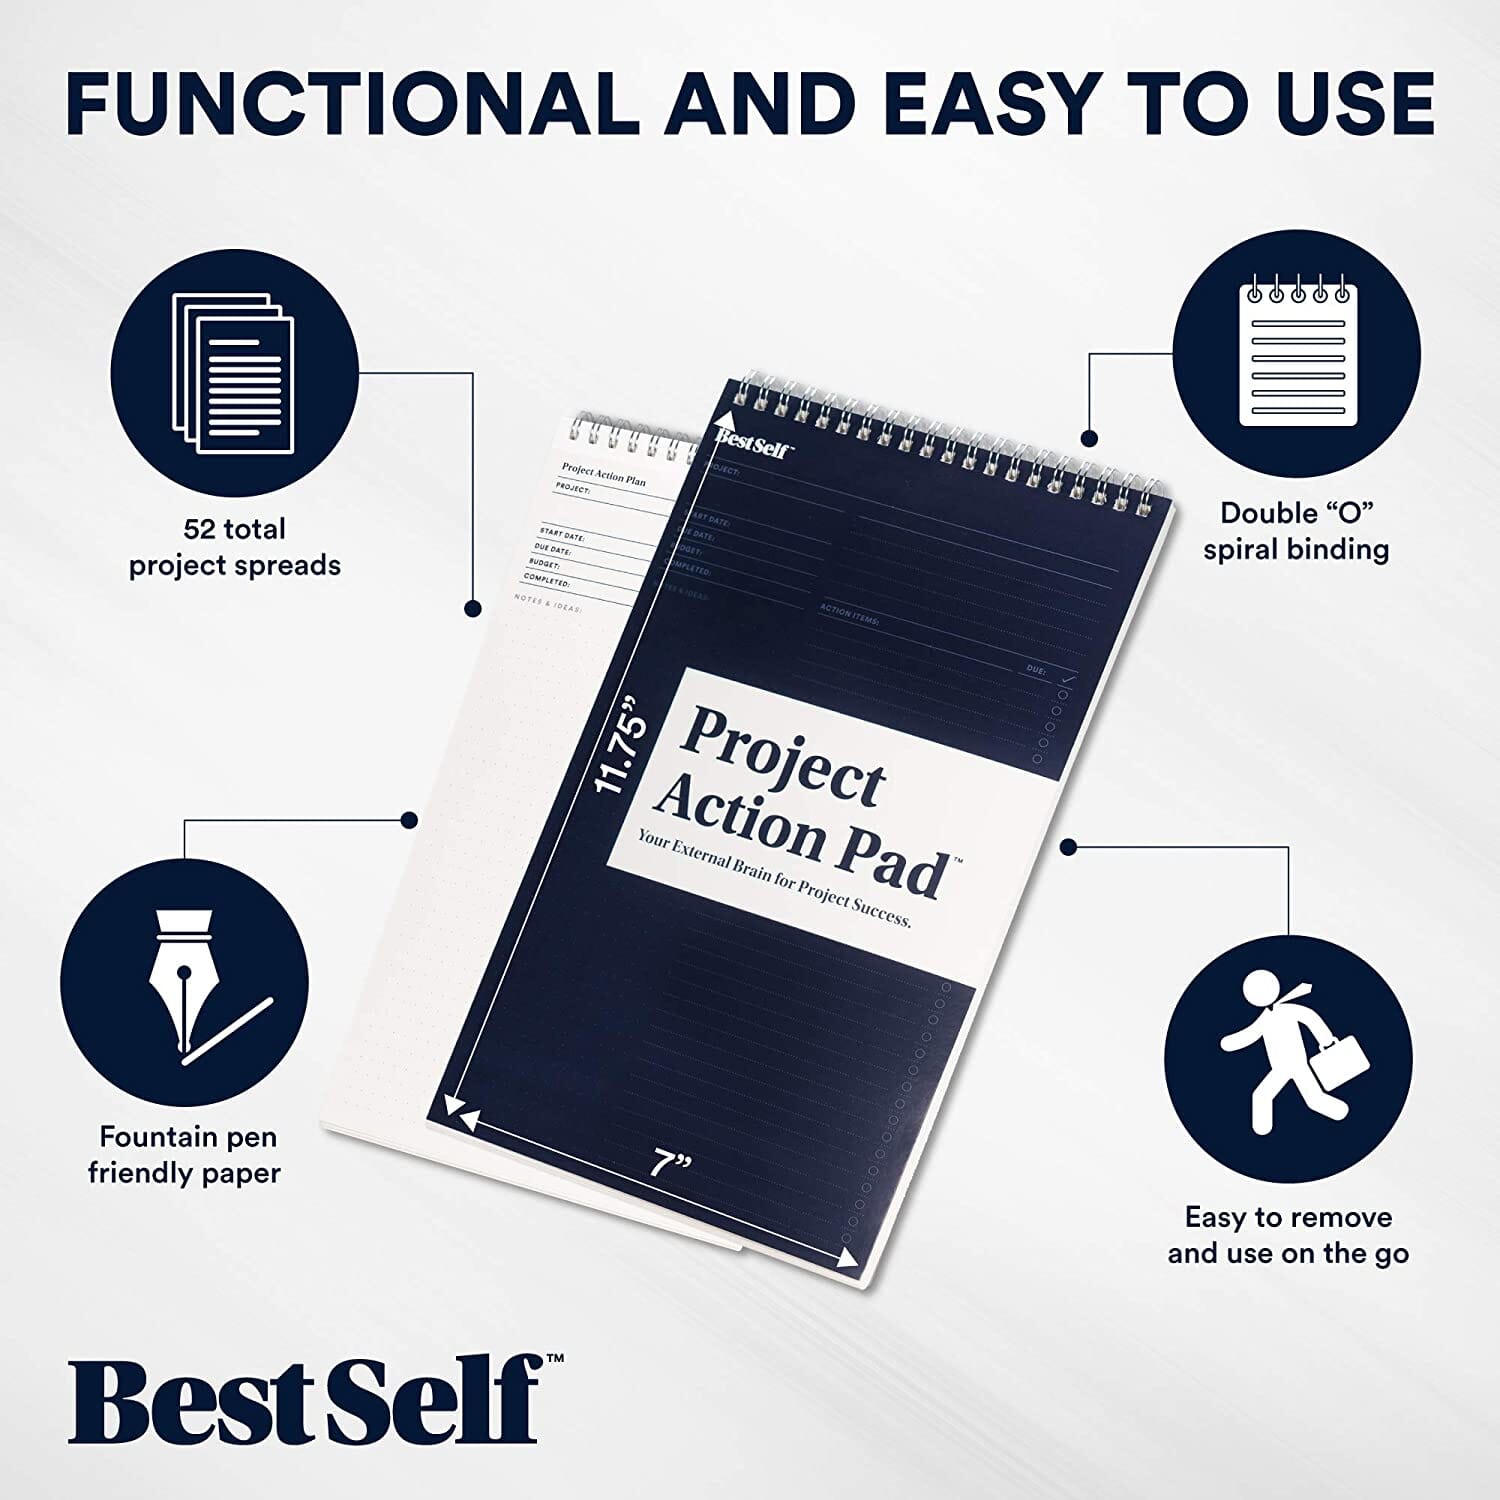 Project Action Pad Notebooks & Notepads Personal Growth